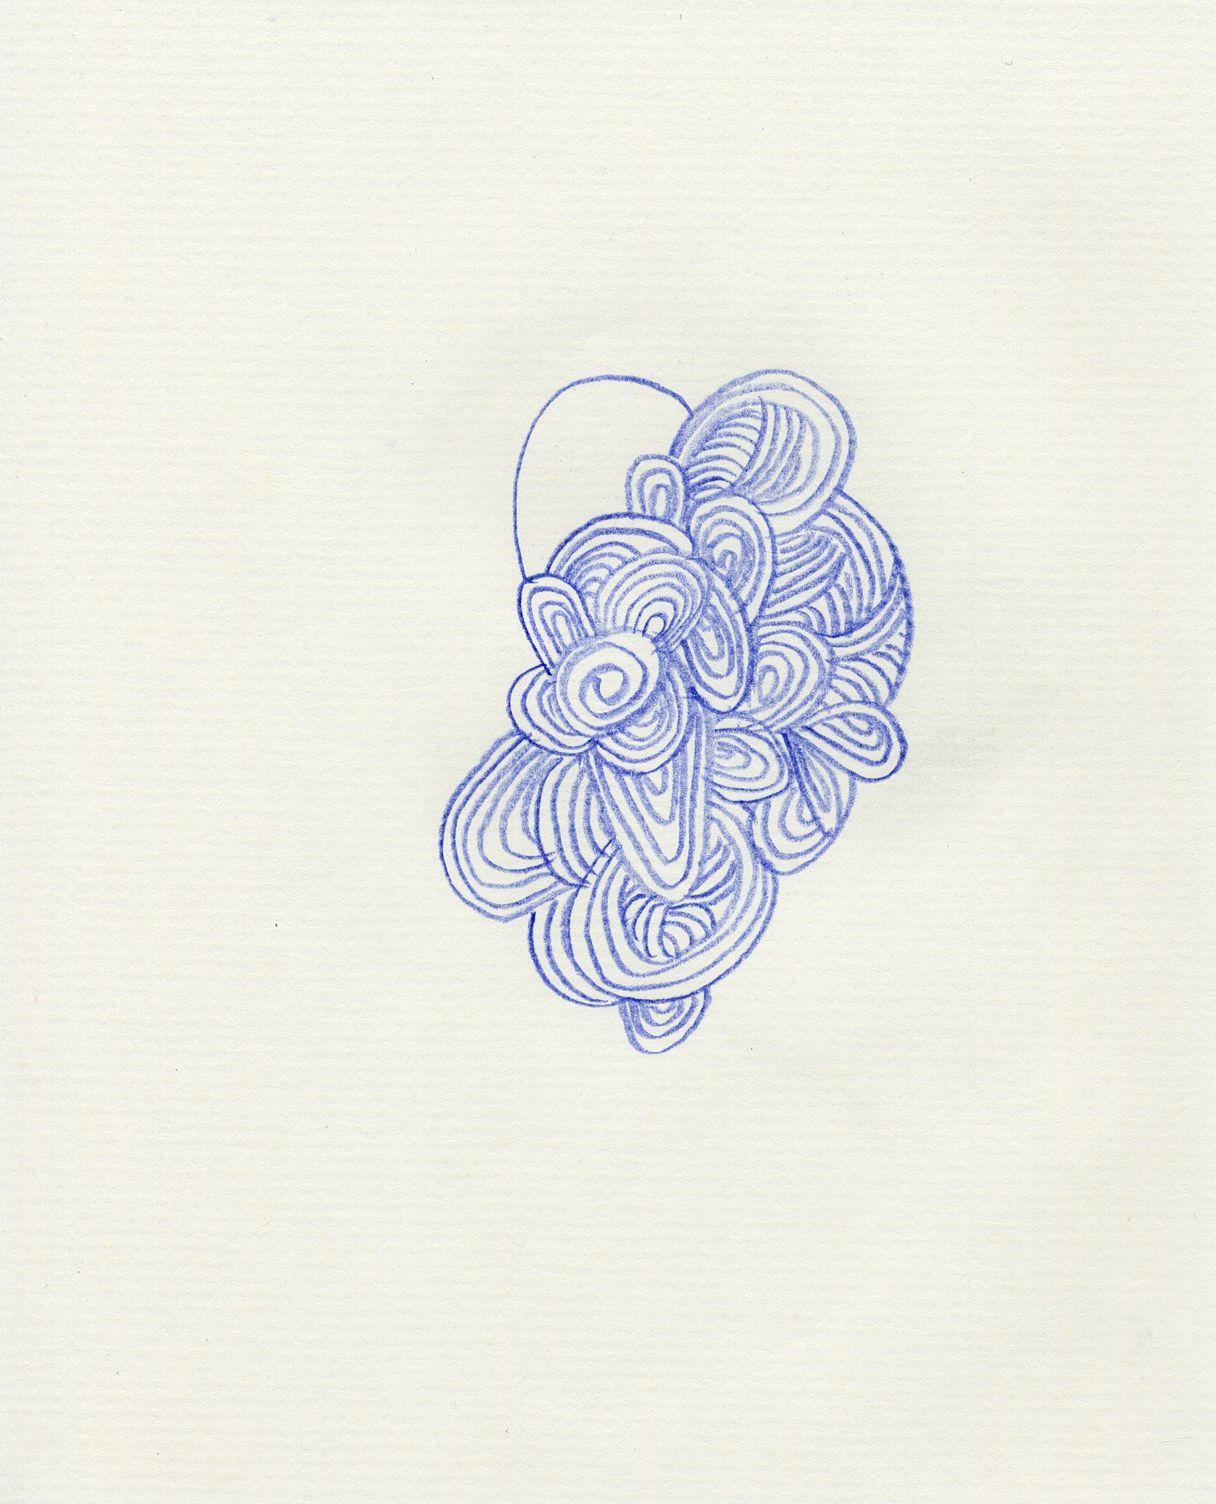 Horizon (2011), Work on Paper by Claudia Hill